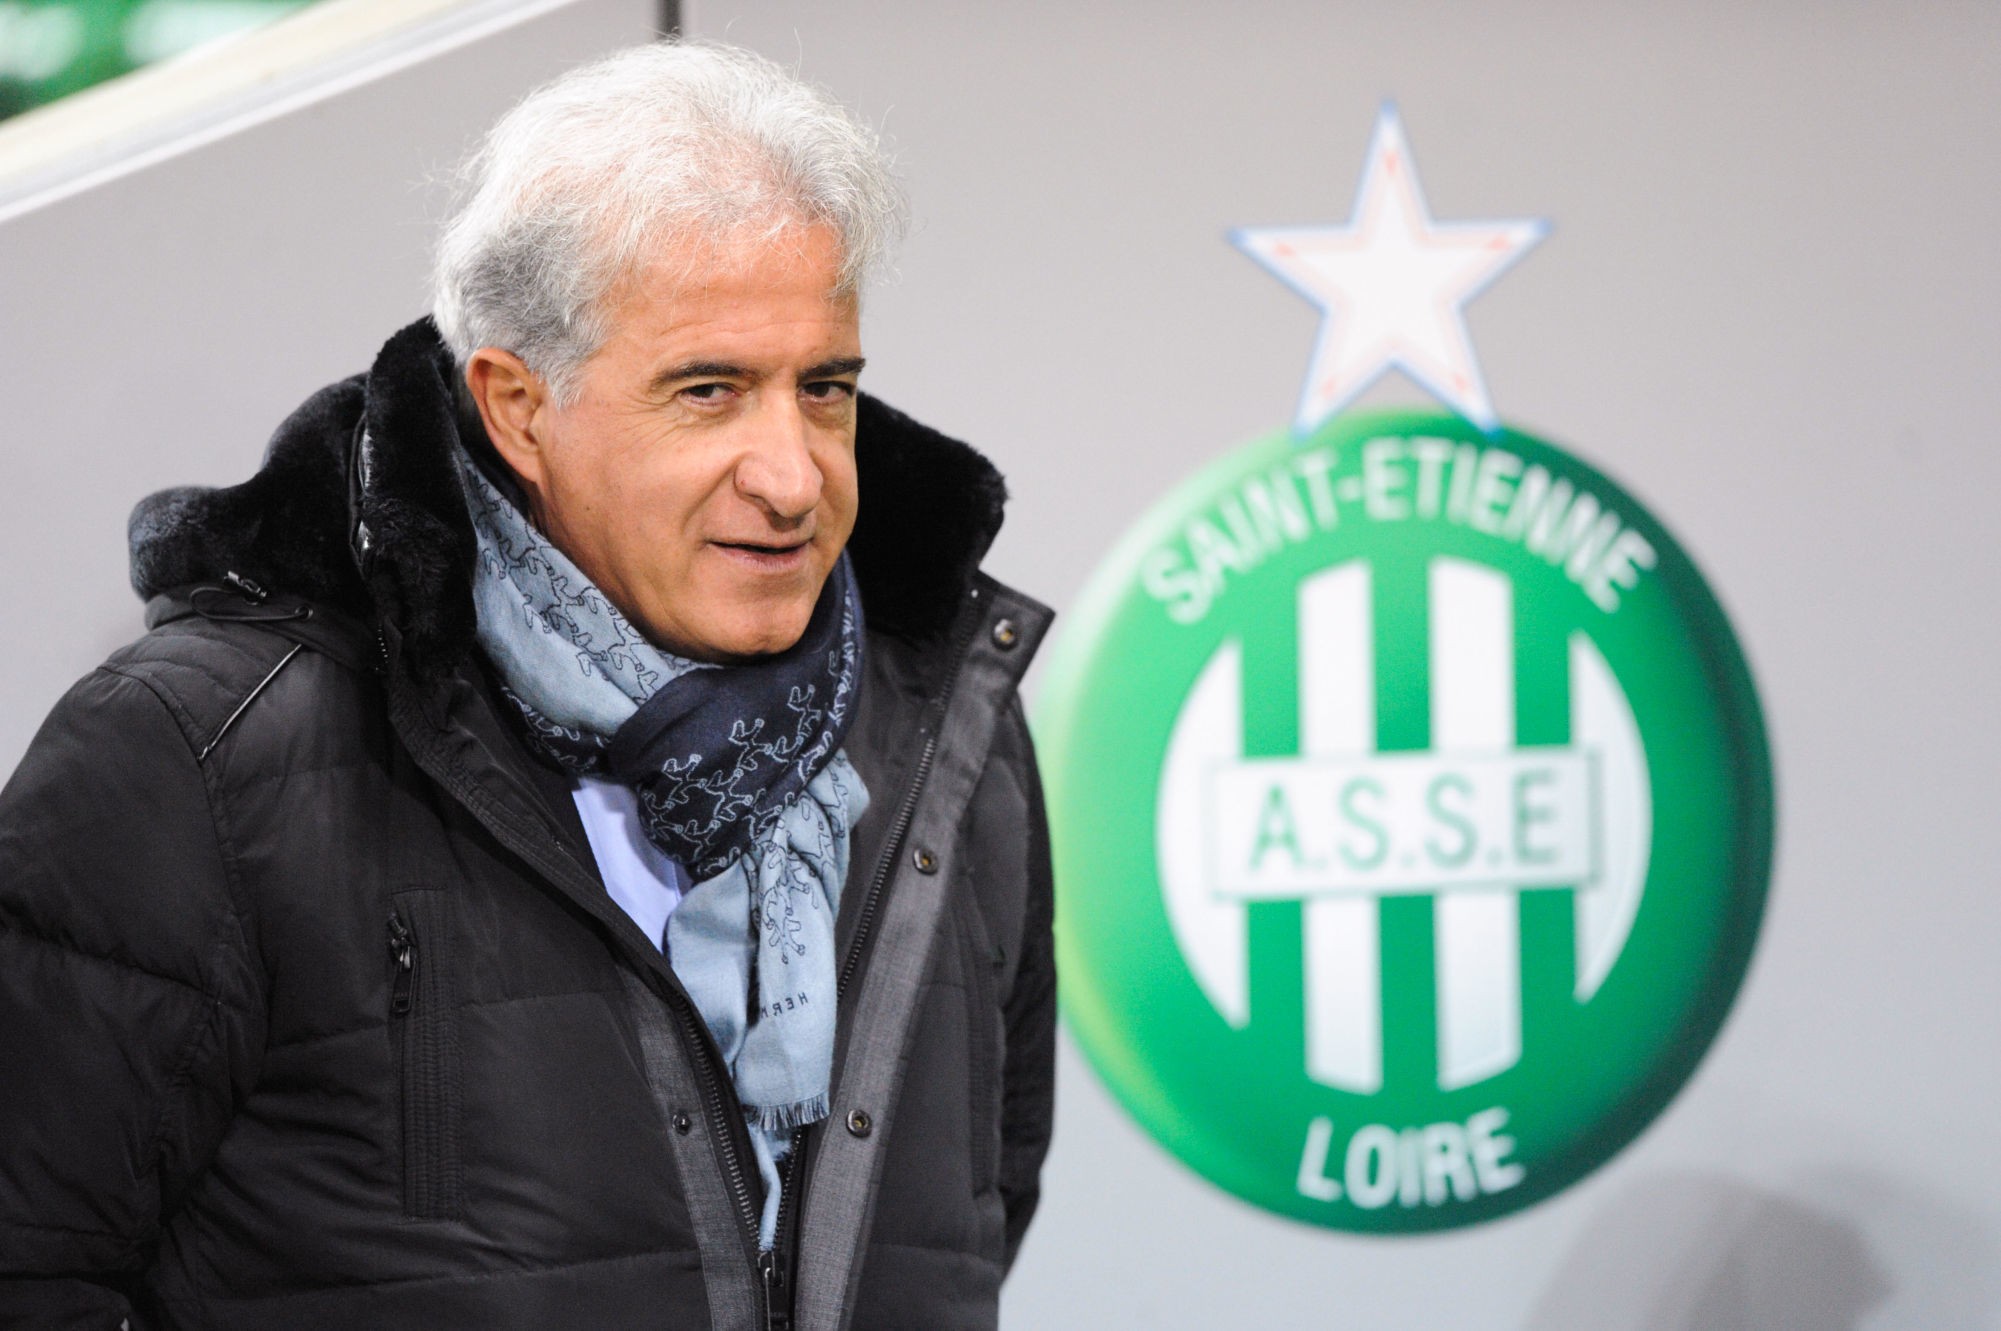 Bernard Caiazzo president of Saint Etienne during the Ligue 1 match between As Saint Etienne and Ogc Nice at Stade Geoffroy-Guichard on November 20, 2016 in Saint-Etienne, France. (Photo by Jean Paul